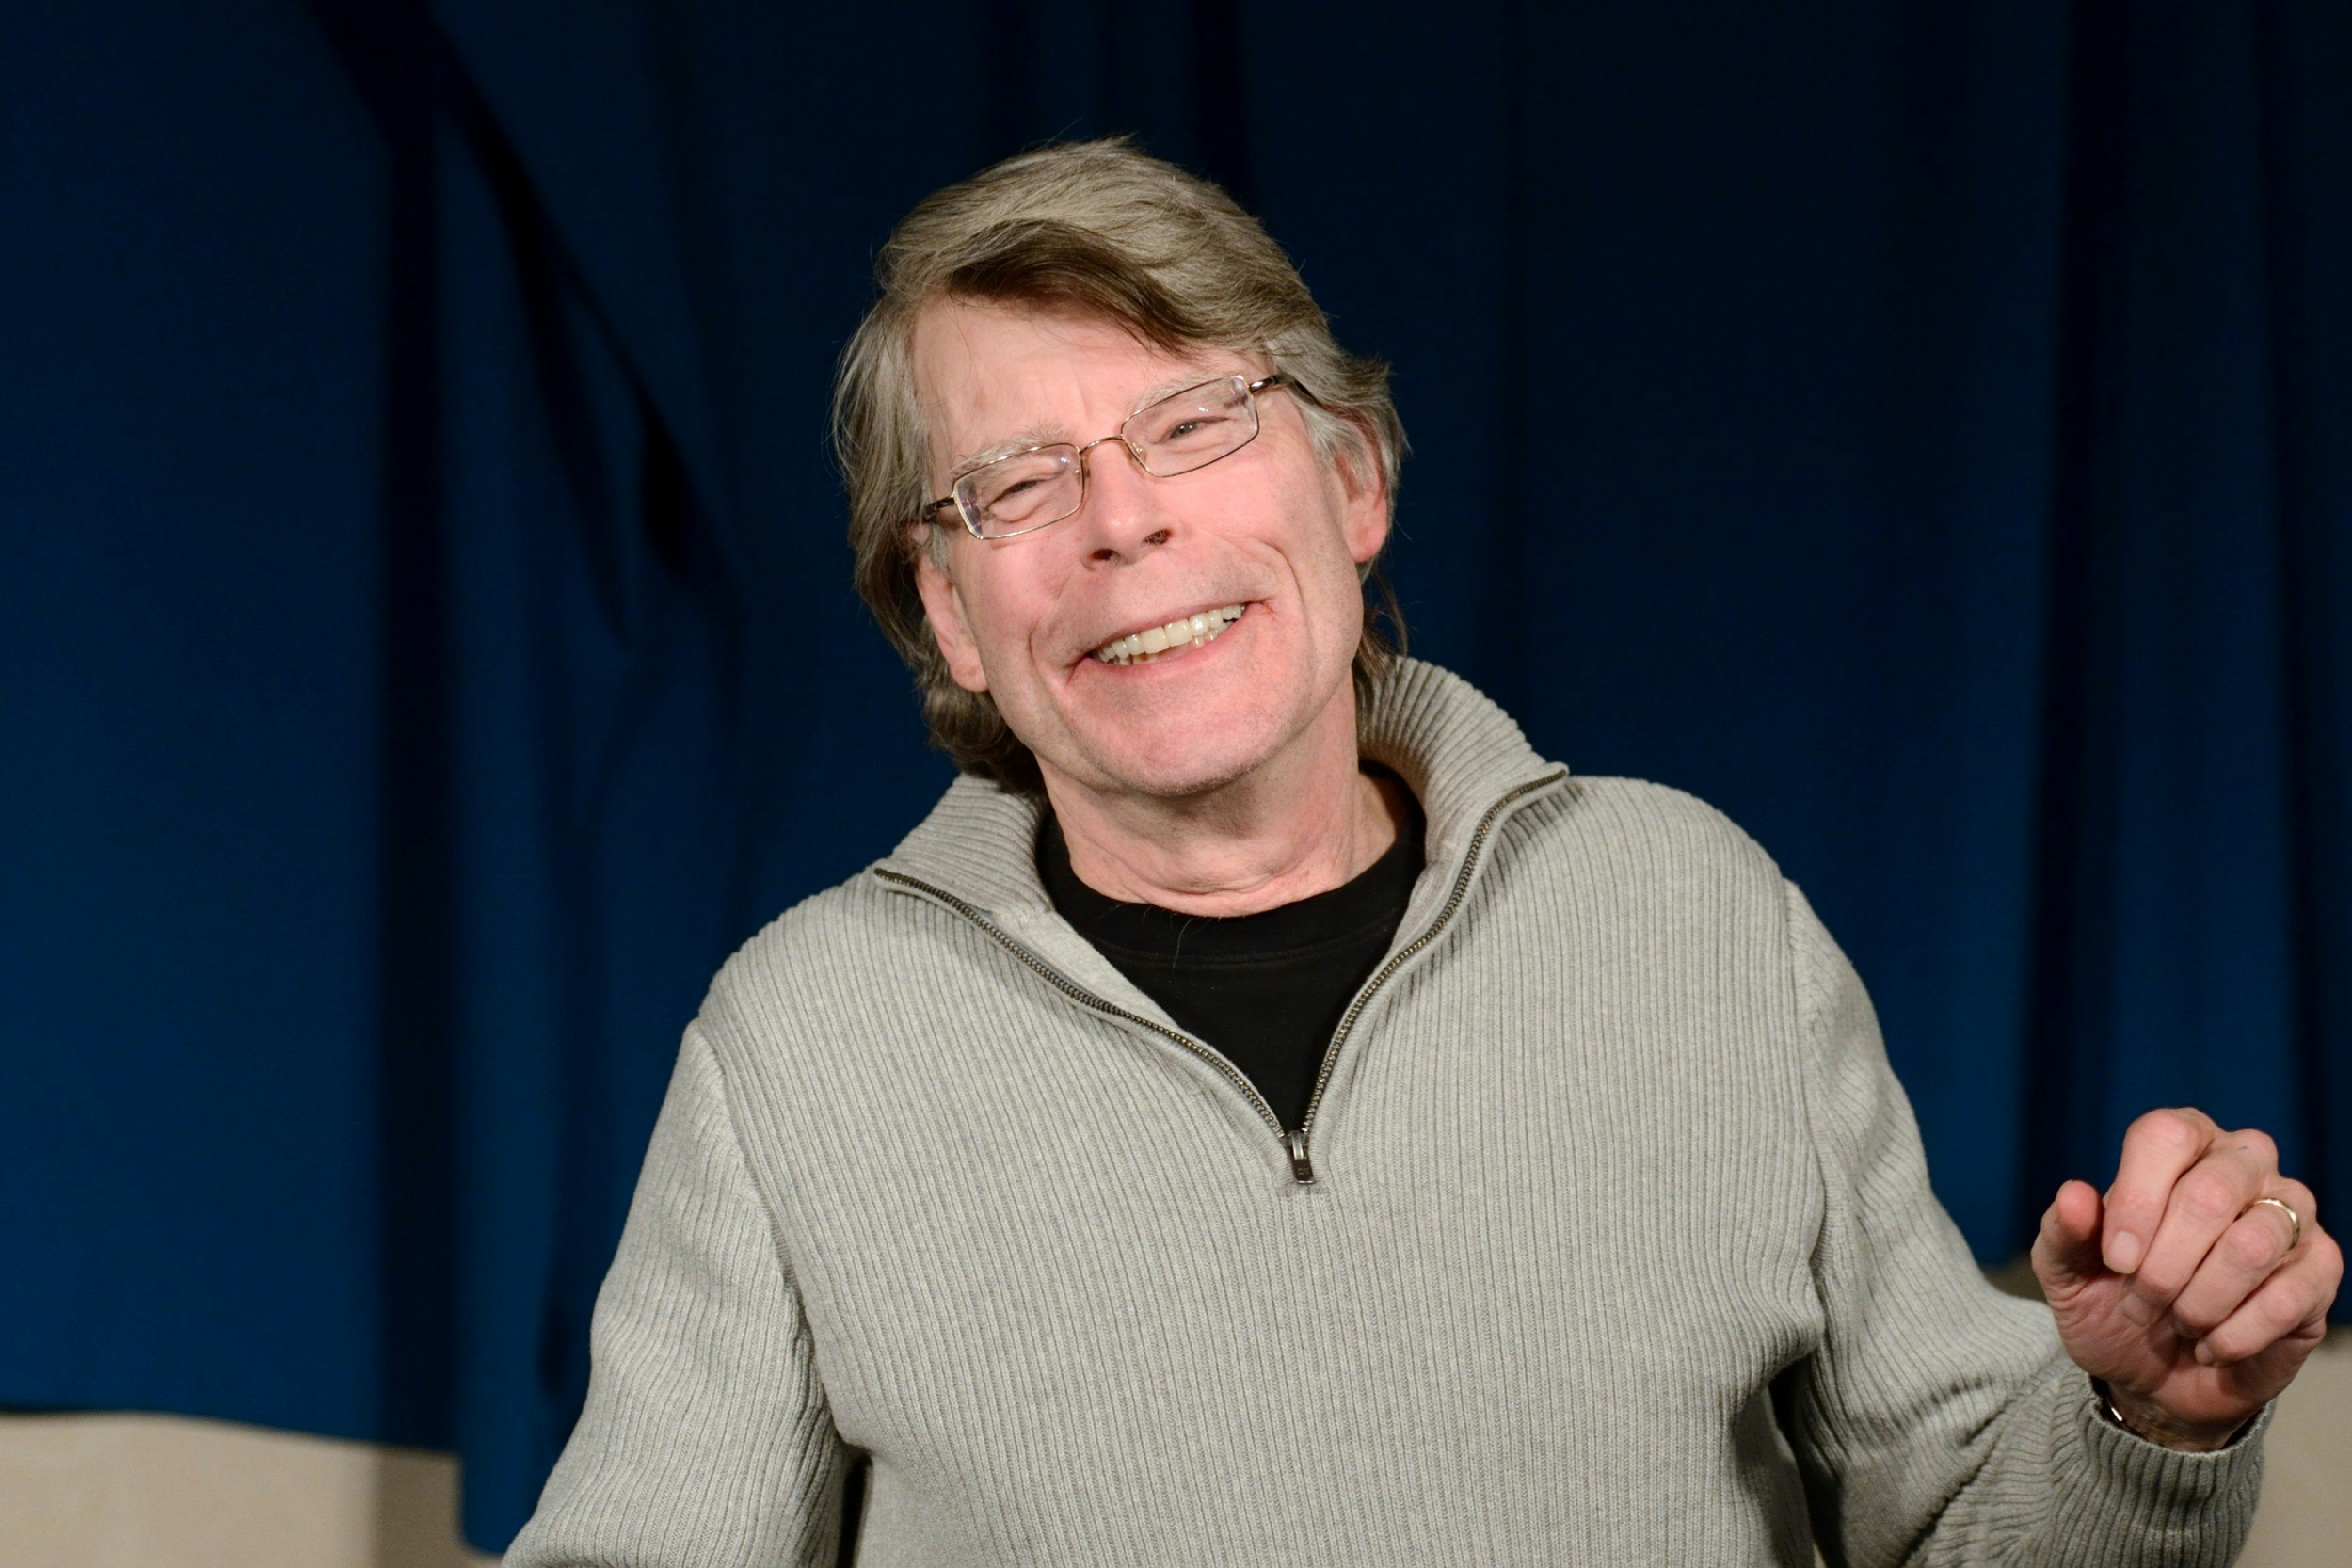 Stephen King posing for photographers at a press conference